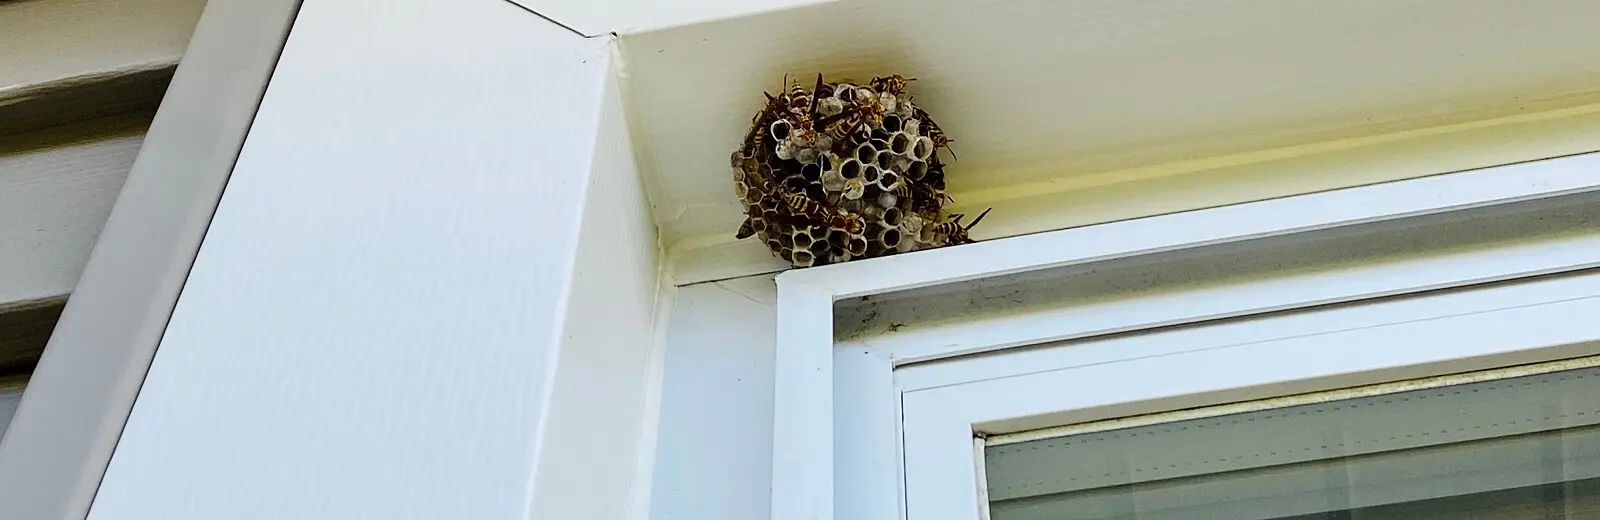 A bird nest in the window of a house.